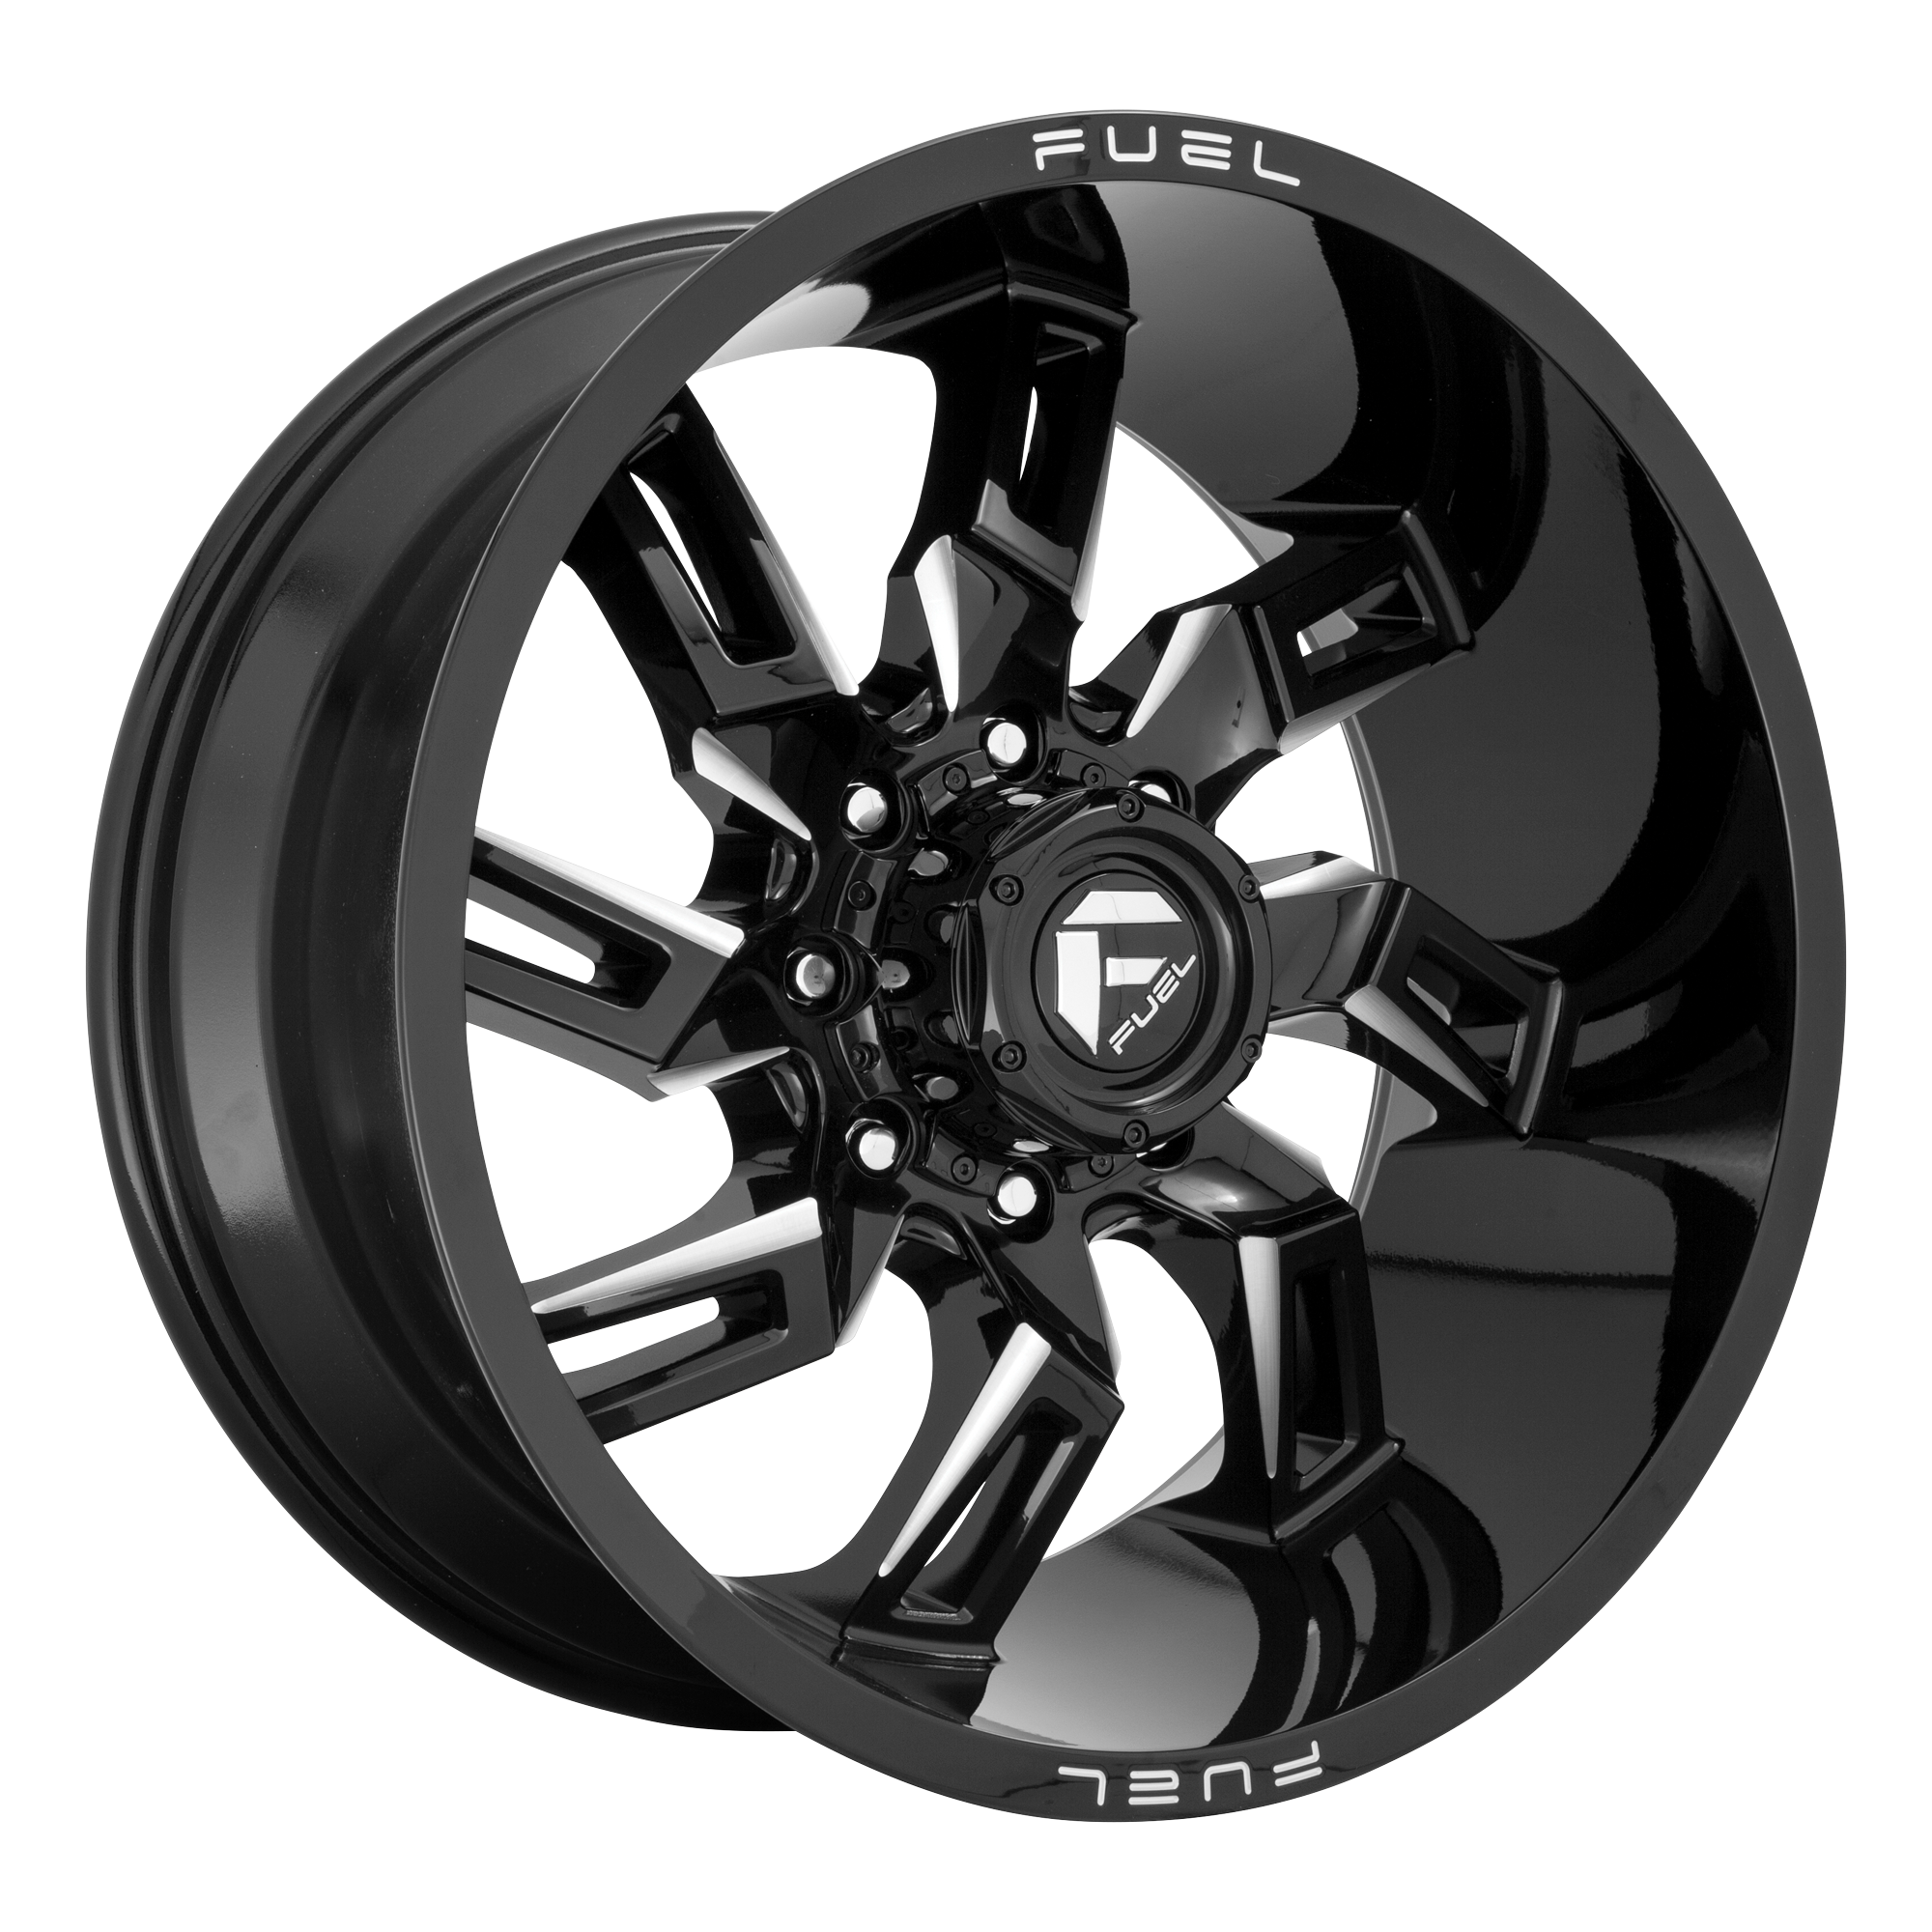 LOCKDOWN 20x10 8x180.00 GLOSS BLACK MILLED (-18 mm) - Tires and Engine Performance